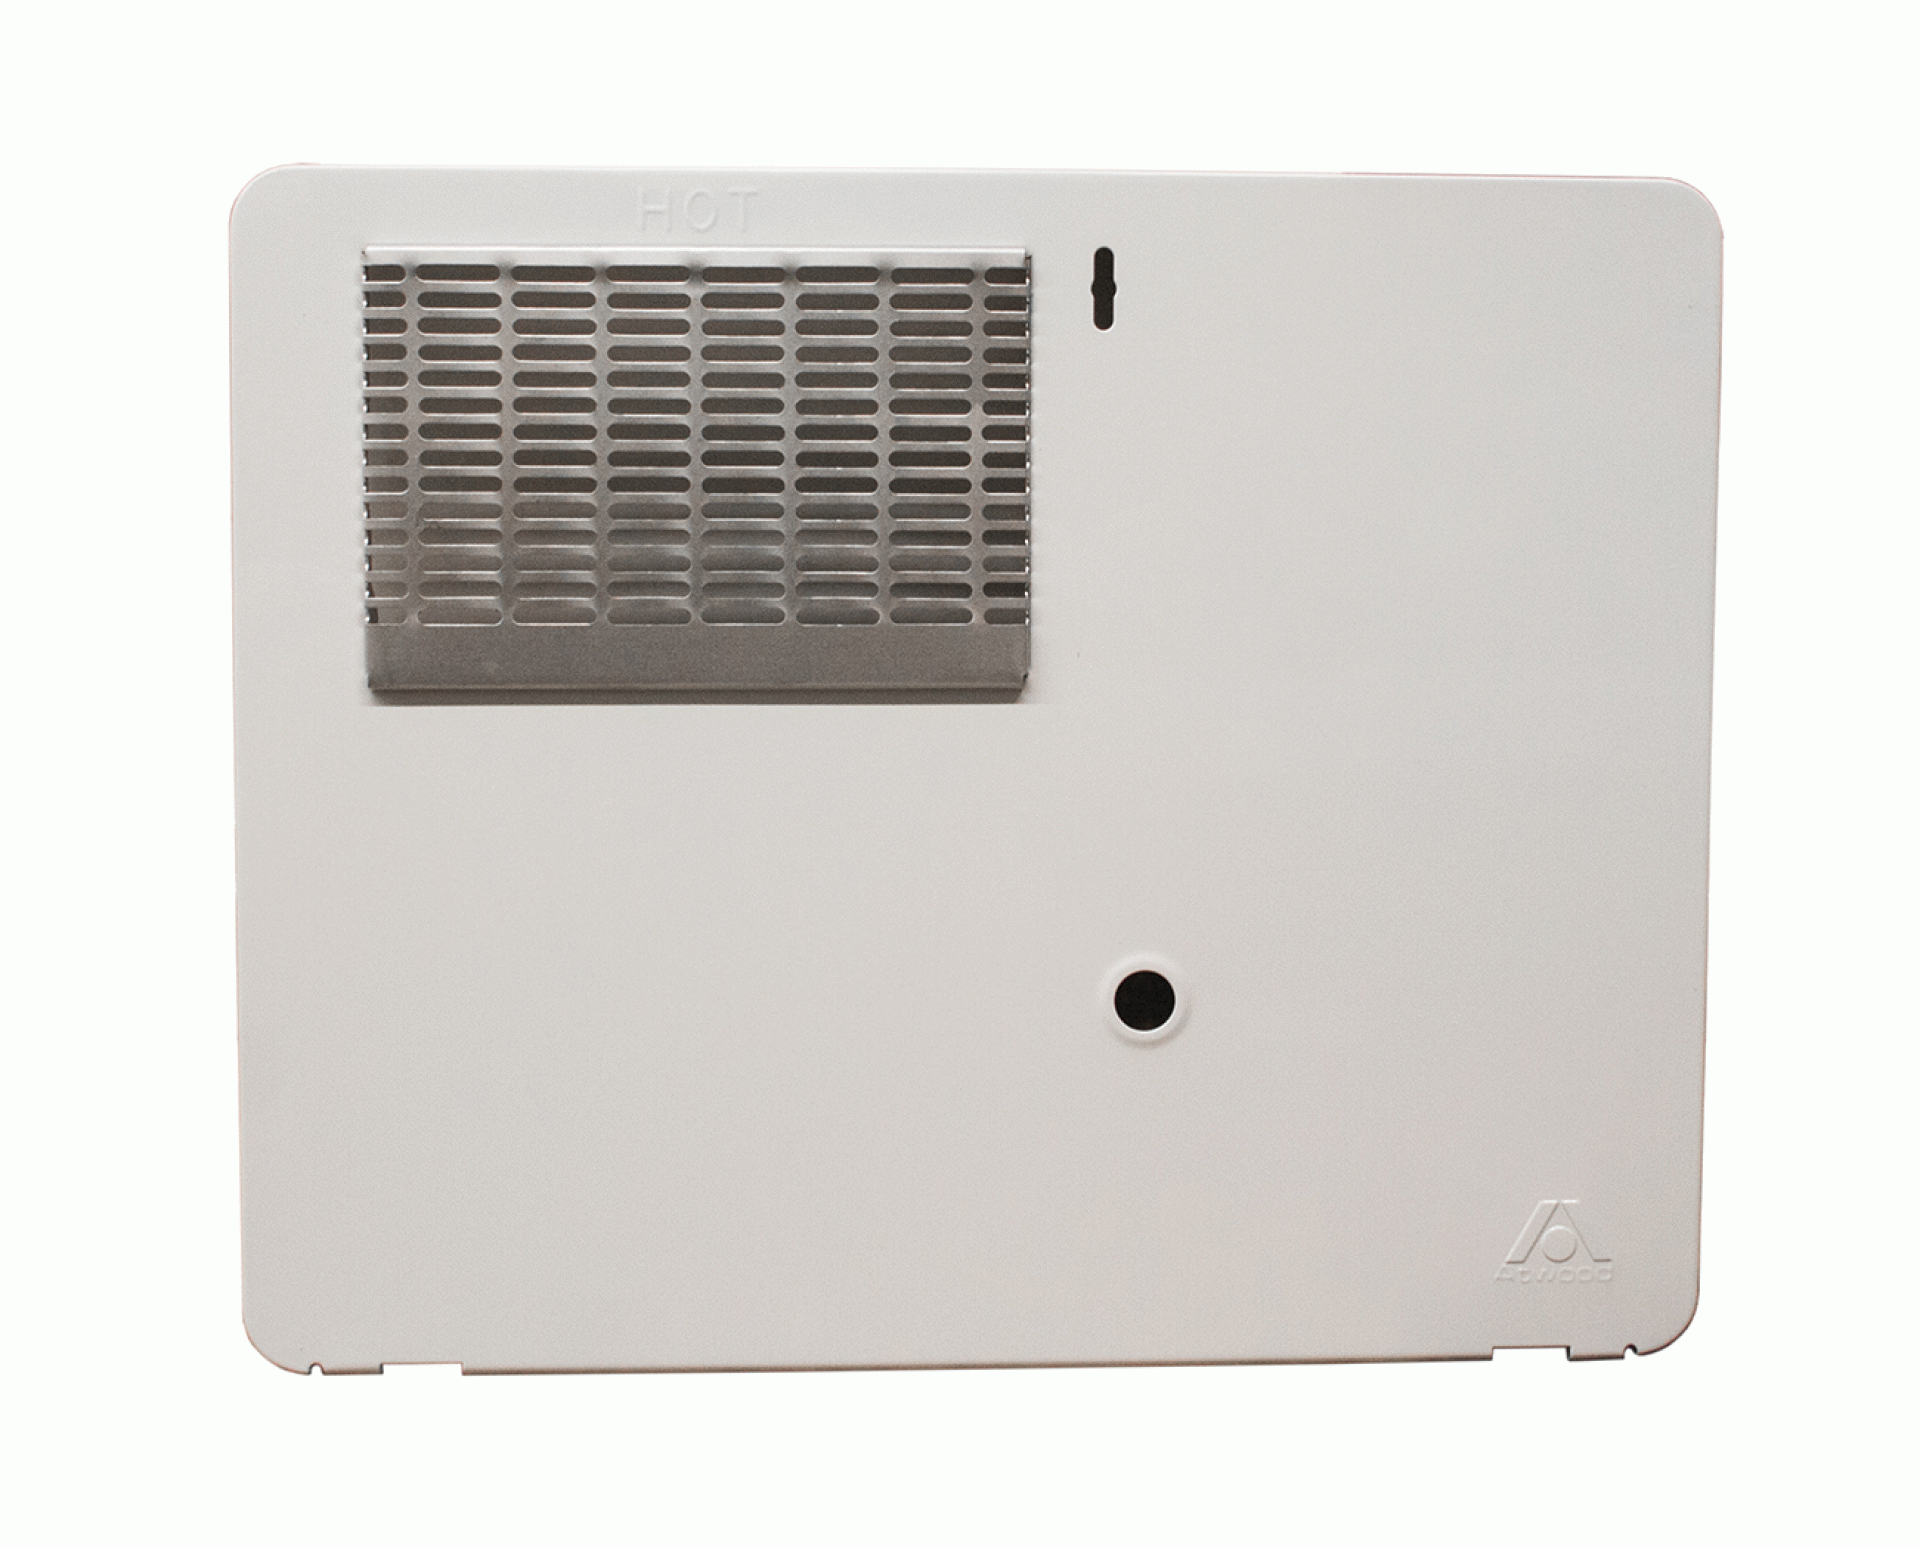 ATWOOD MOBILE PRODUCTS LLC | 91386 | Replacement Door for Atwood 6 Gallon Water Heater - White